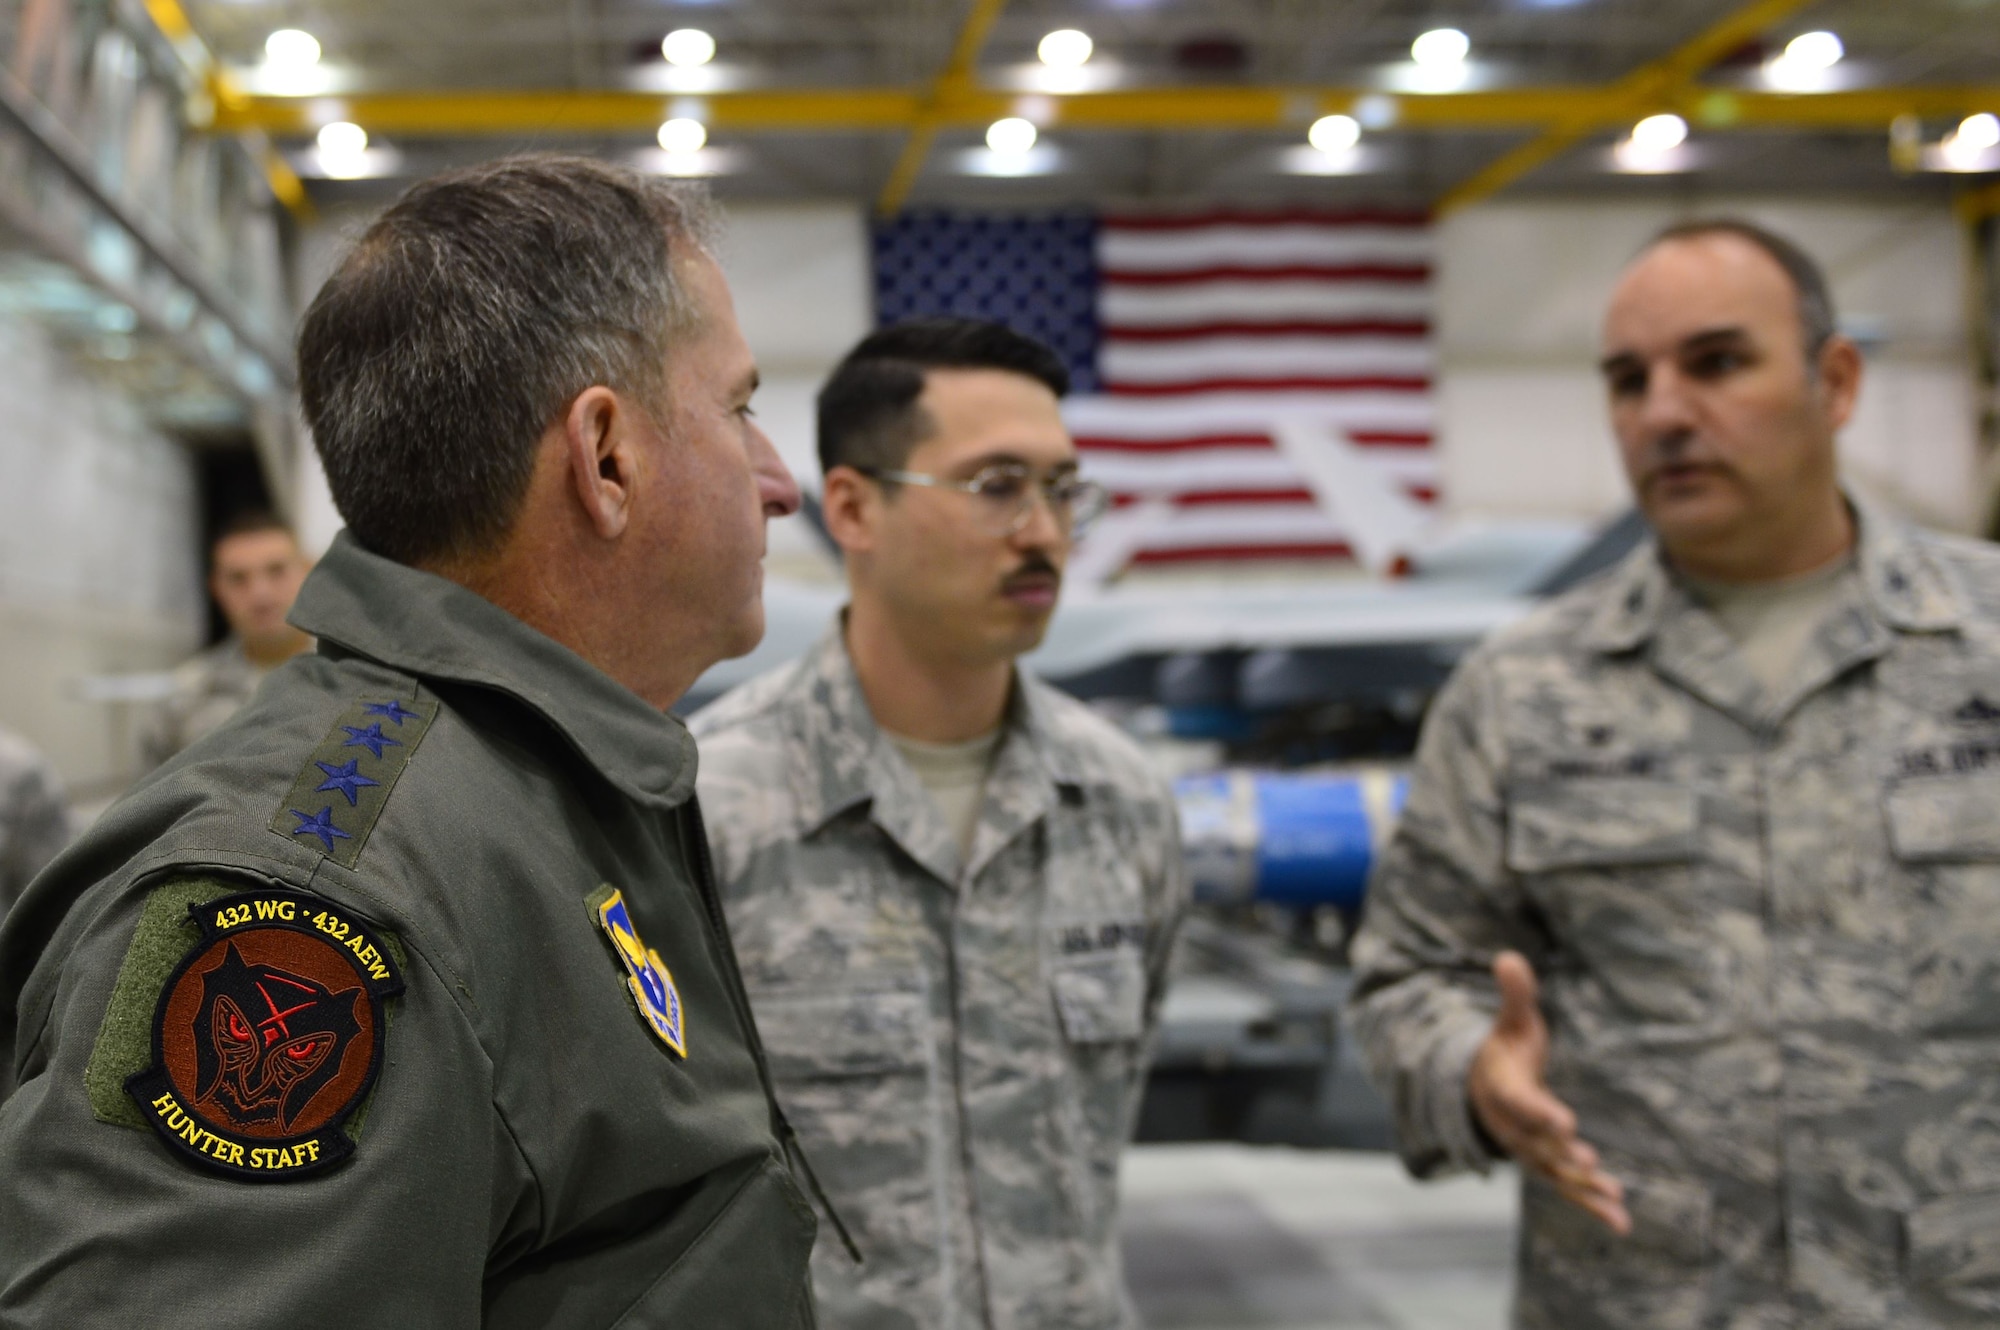 Air Force Chief of Staff Gen. David L. Goldfein speaks to Col. Matthew, 432nd Maintenance Group commander, Jan. 9, 2017, at Creech Air Force Base, Nev. Goldfein visited with the 432nd Wing/432nd Air Expeditionary Wing and 799th Air Base Group Airmen who deliver persistent attack and reconnaissance 24/7/365 against the nation’s enemies.  (U.S. Air Force photo/Airman 1st Class Haley Stevens)